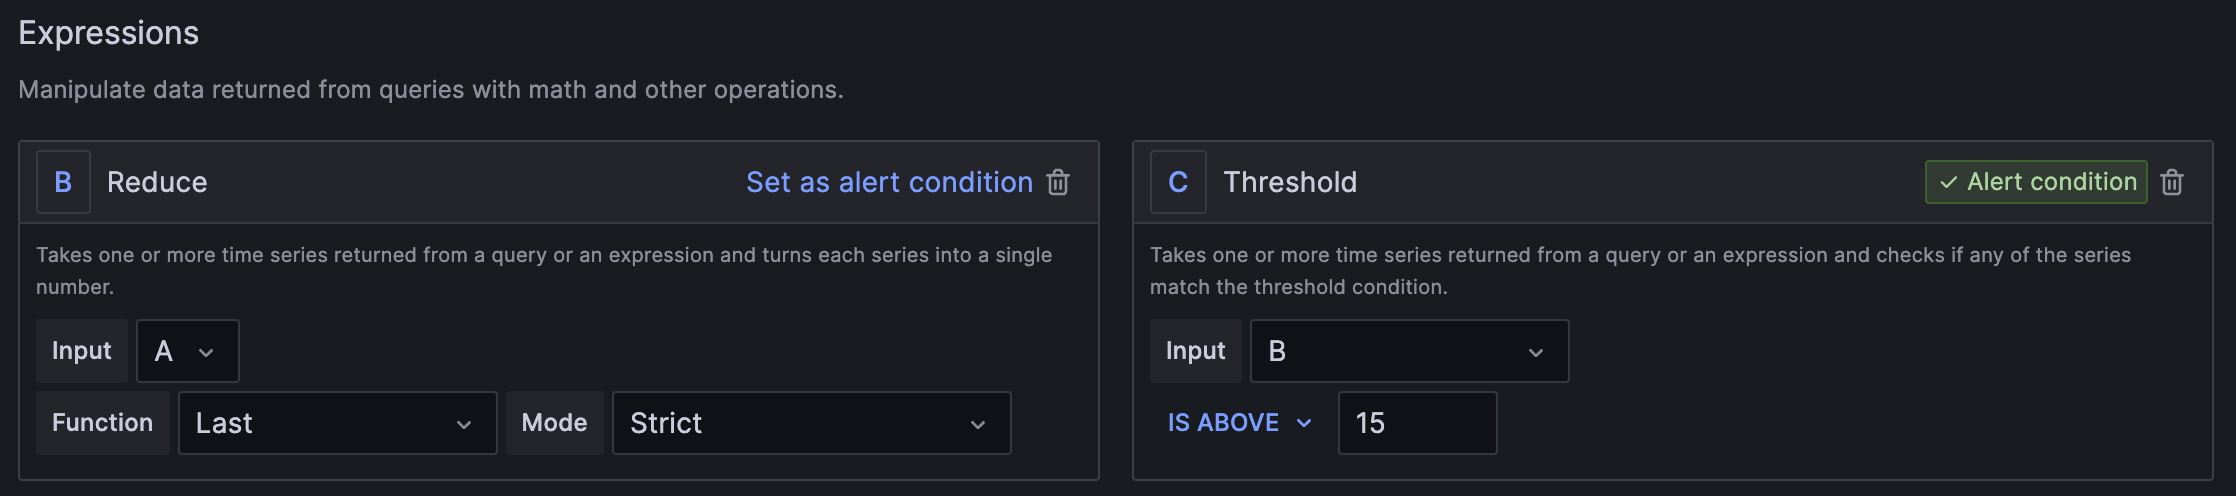 Expression section showing B &quot;reduce&quot; with Input: A, Function: Last, Mode: Strict, C Threshold with Input: B, Is Above: 15 and Alert Condition enabled indicator